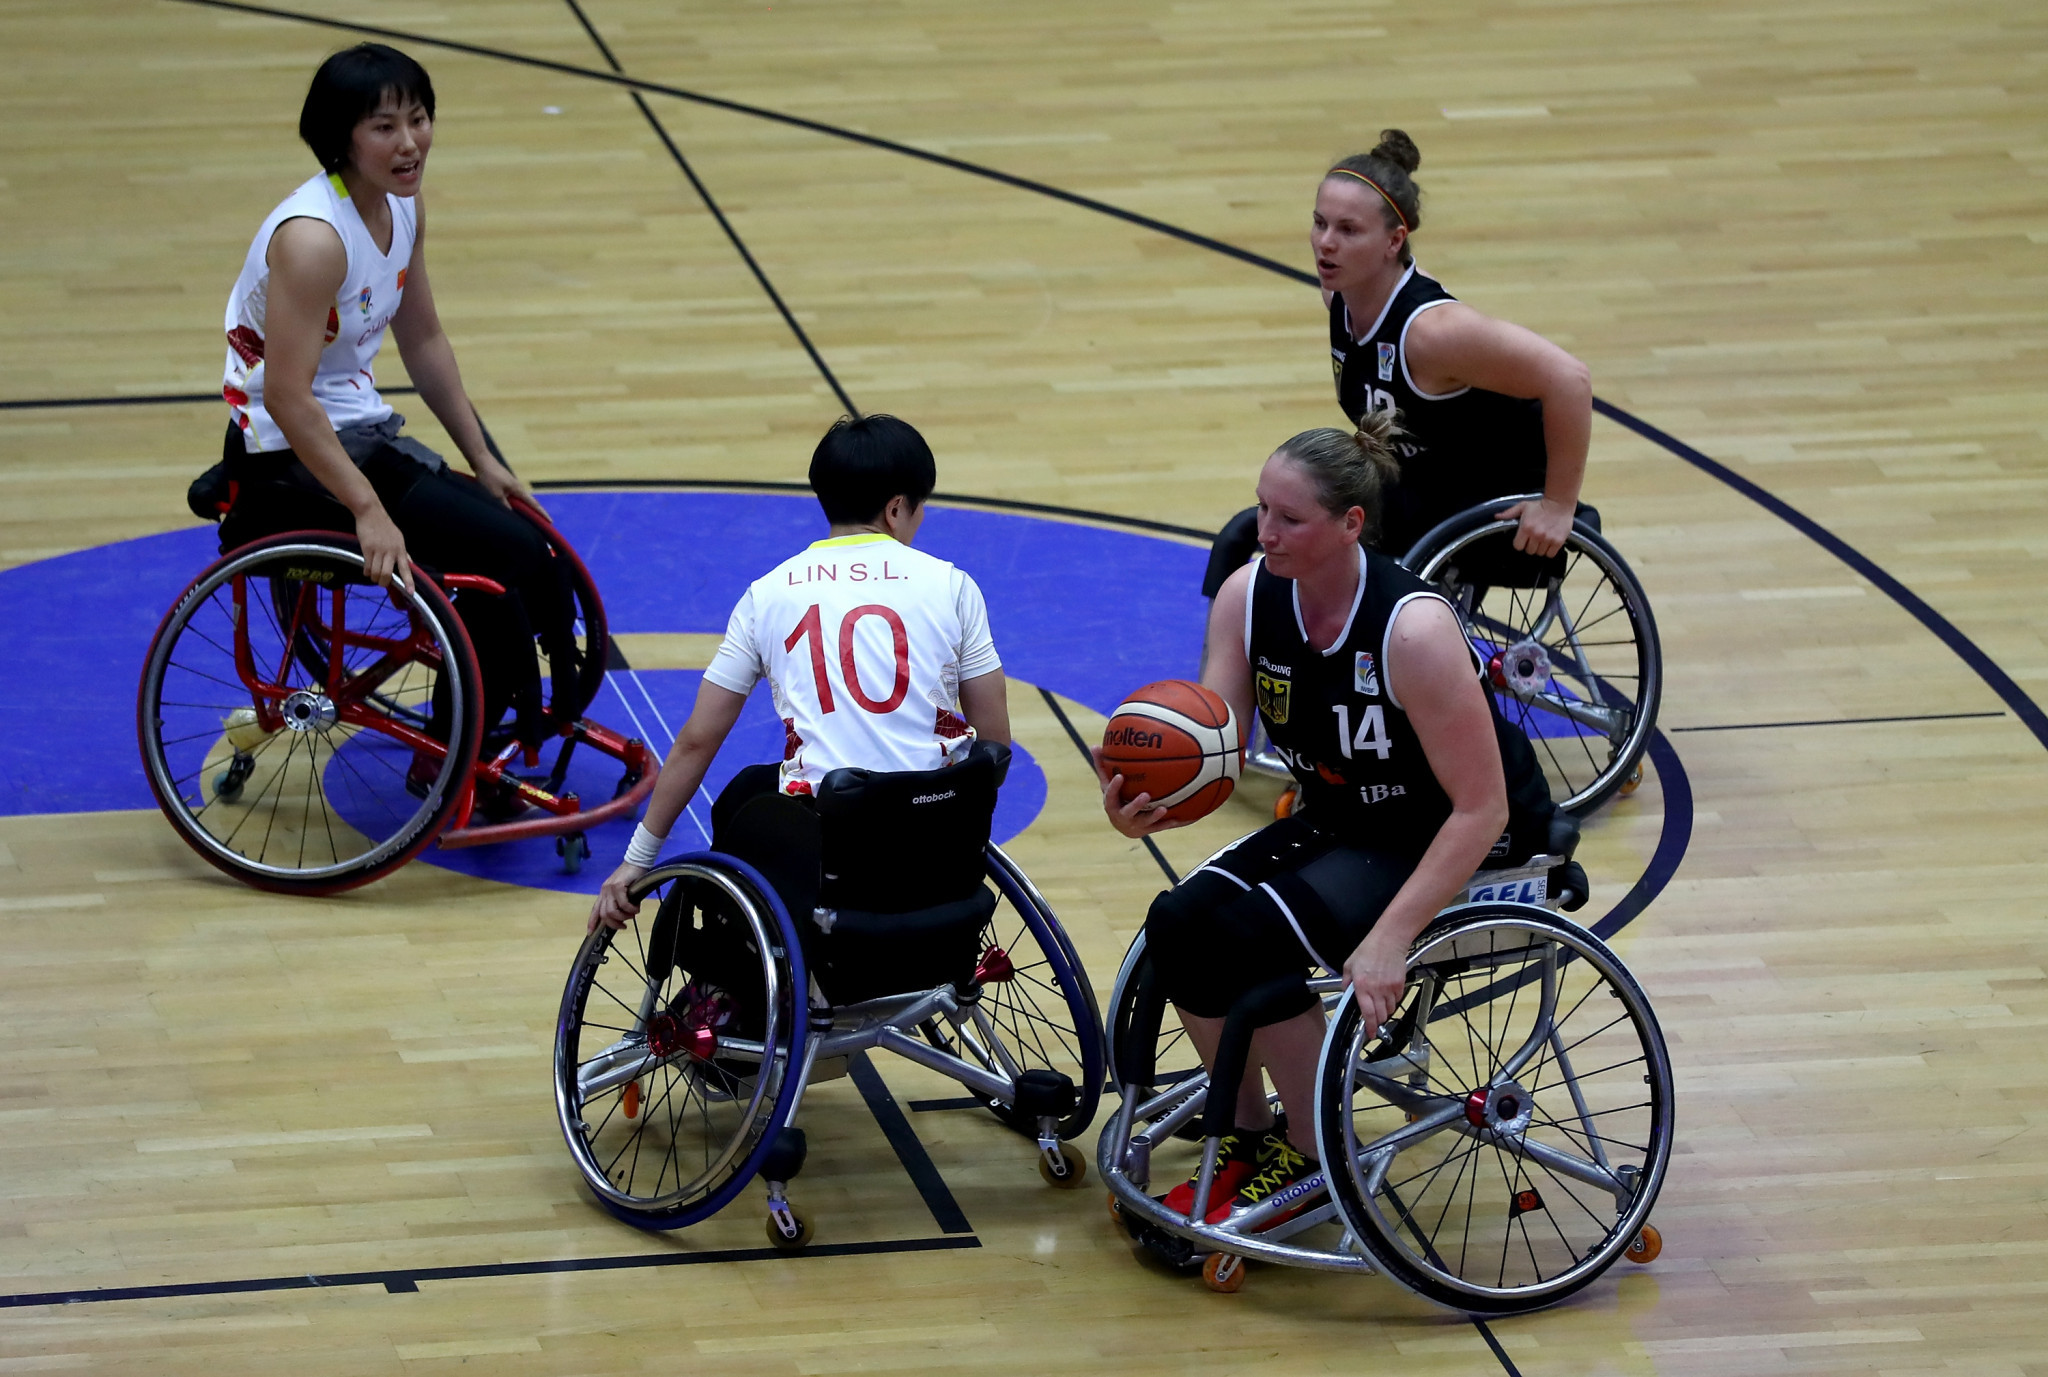 The Congress took place alongside the World Wheelchair Basketball Championships in Hamburg ©Getty Images